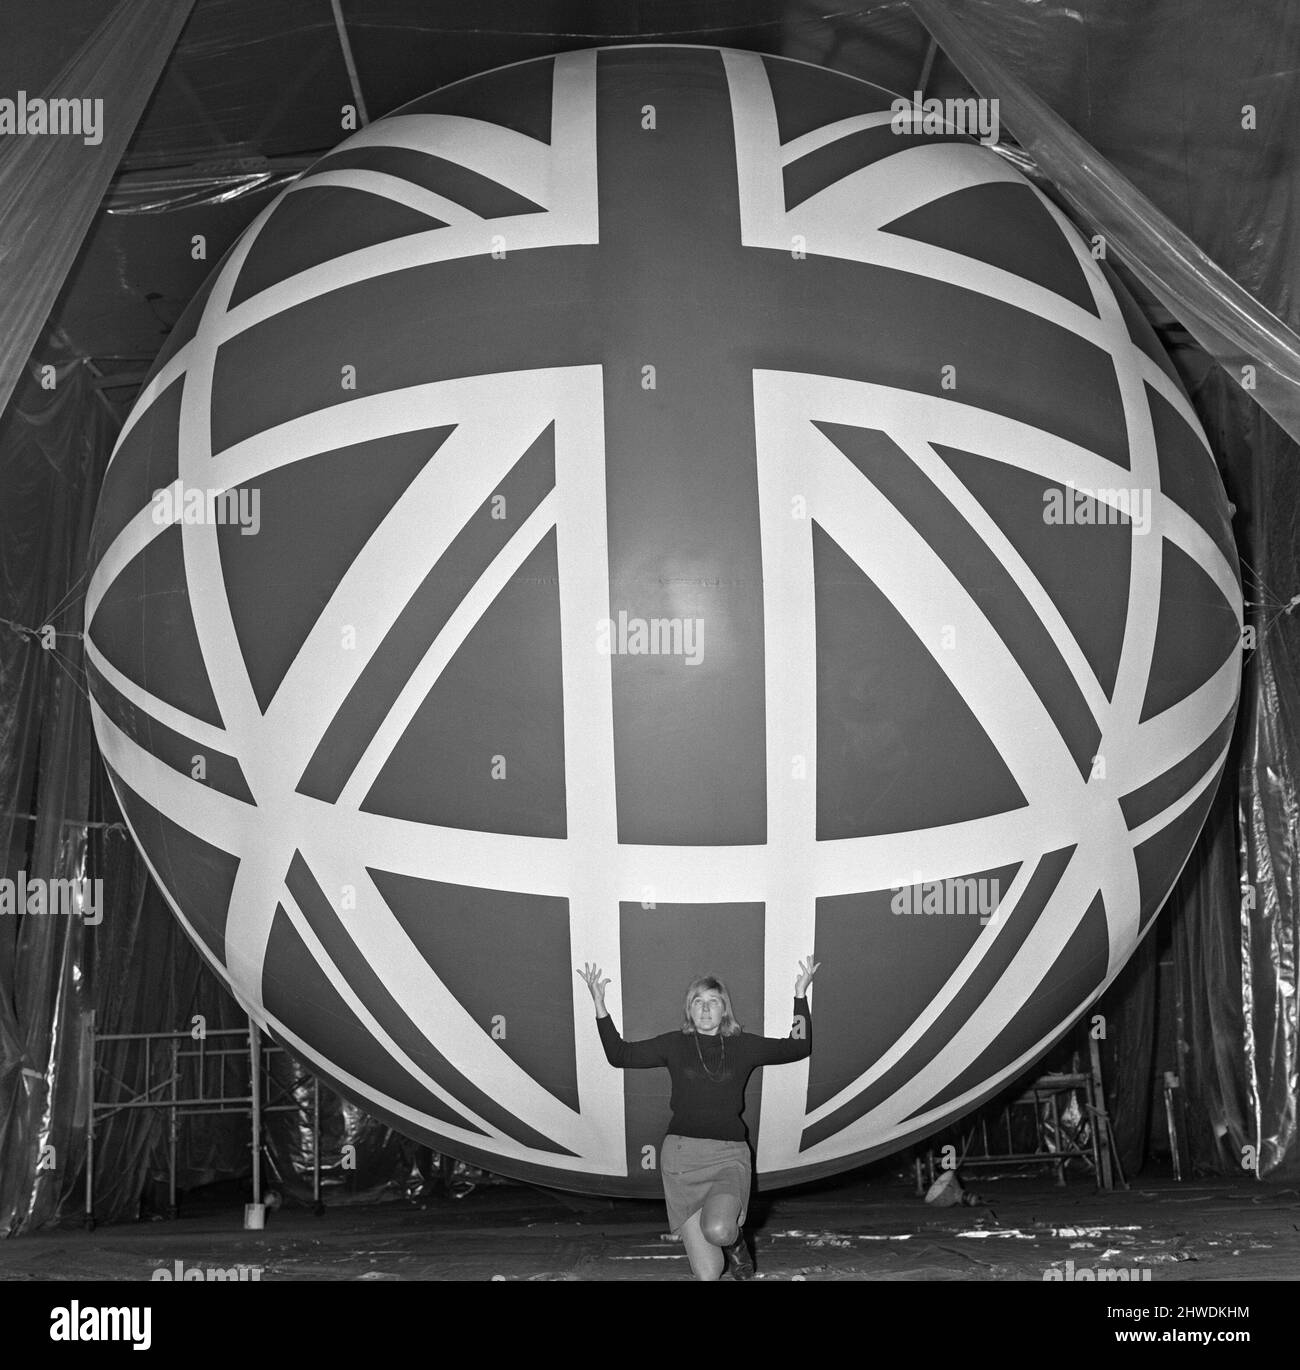 Union Jack Giant Balloon at Expo 70 Pretty receptionist, 23 year old Lynne Roberts, attempts a Charles Atlas pose beneath one of the huge balloons destined to fly over the British pavilion at the Expo 70.   The exhibition will open at Osaka, Japan in March 1970.  The balloon is 20 feet in diameter  Lynne is employed by Loyne Limited, of Ashton under Lyne, Lancashire, where the balloons are being given a special flexible type of coating.  Picture taken 31st December 1969 Stock Photo